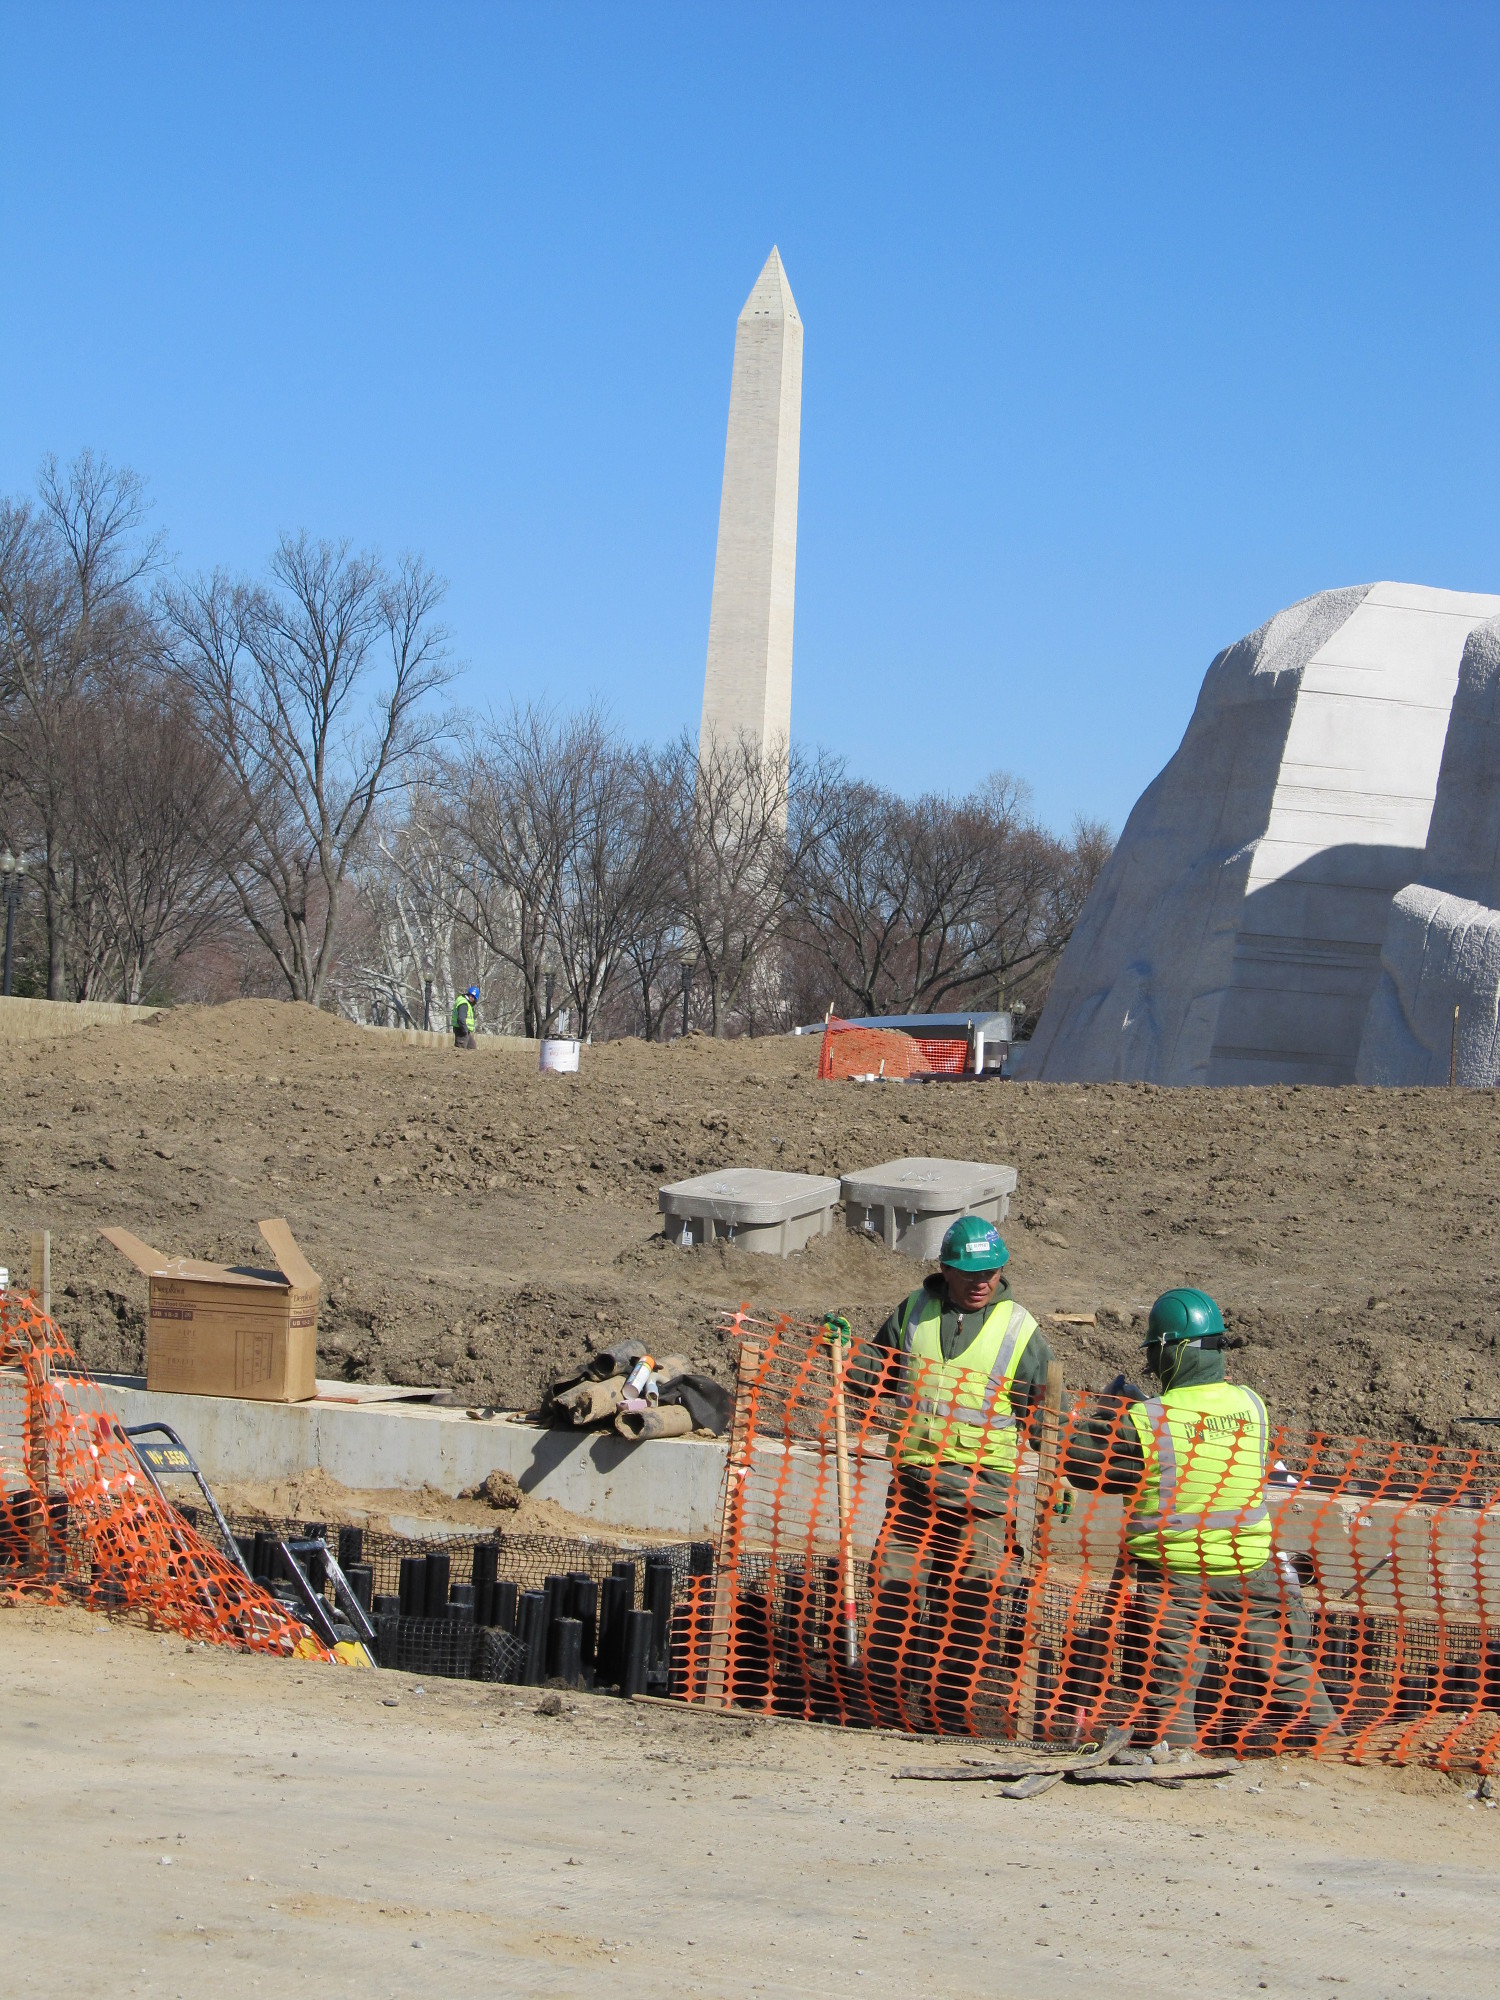 Silva Cells were installed at the Martin Luther King, Jr. Memorial in winter of 2011.